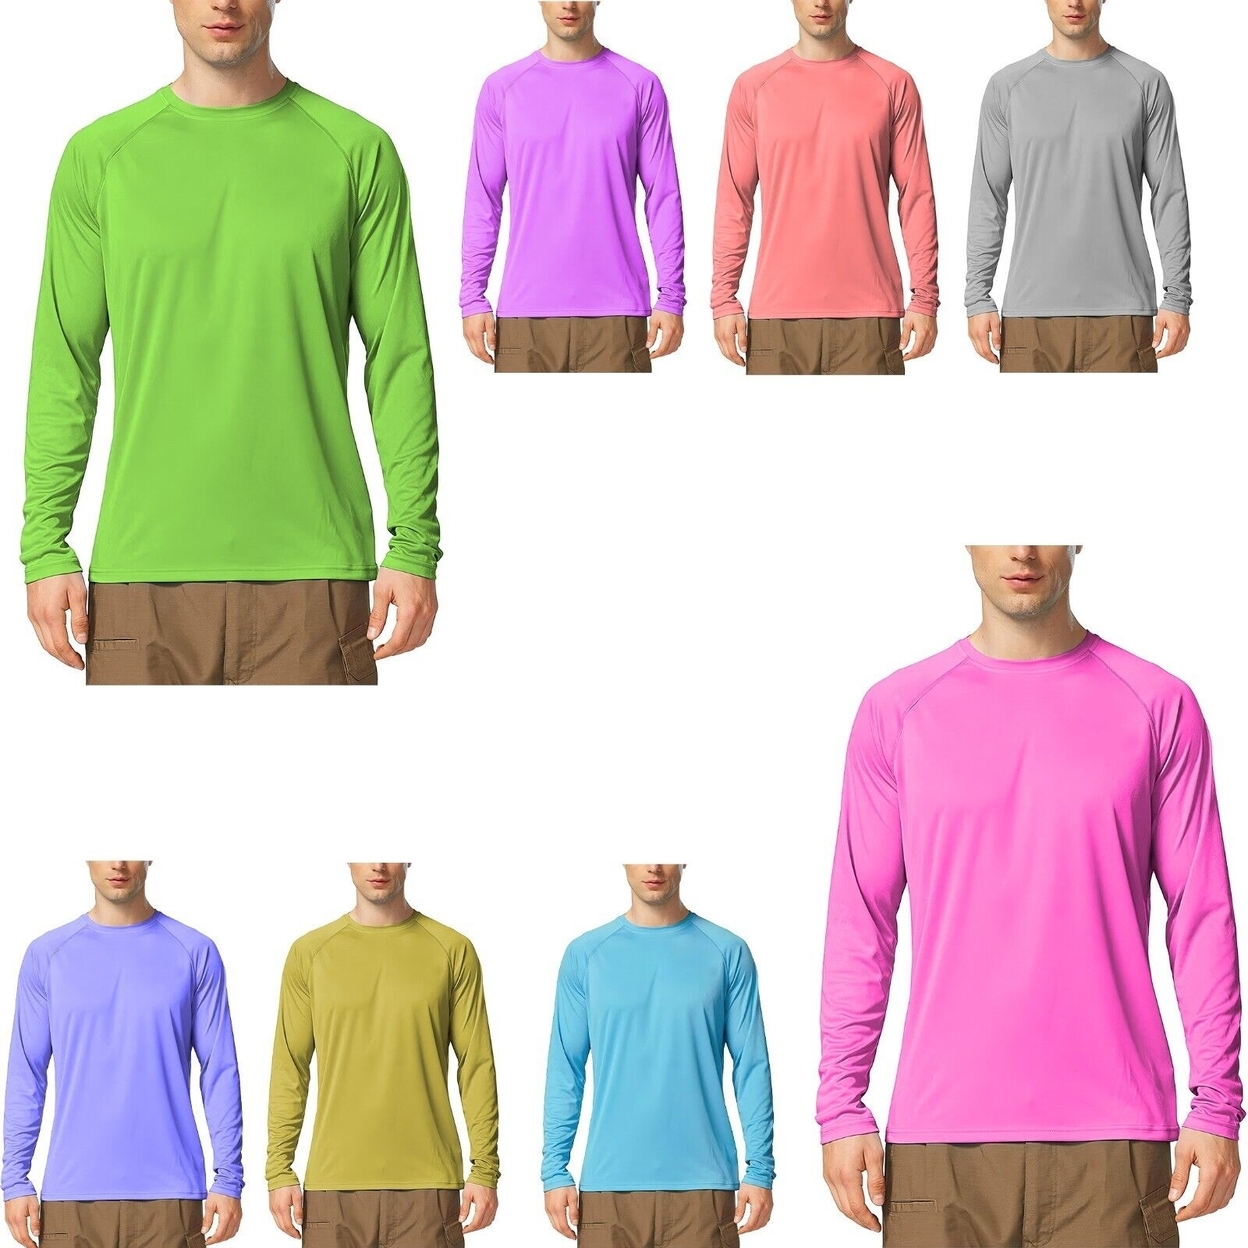 Multi-Pack: Men's Dri-Fit Moisture Wicking Athletic Cool Performance Slim Fit Long Sleeve T-Shirts - 1-pack, Small